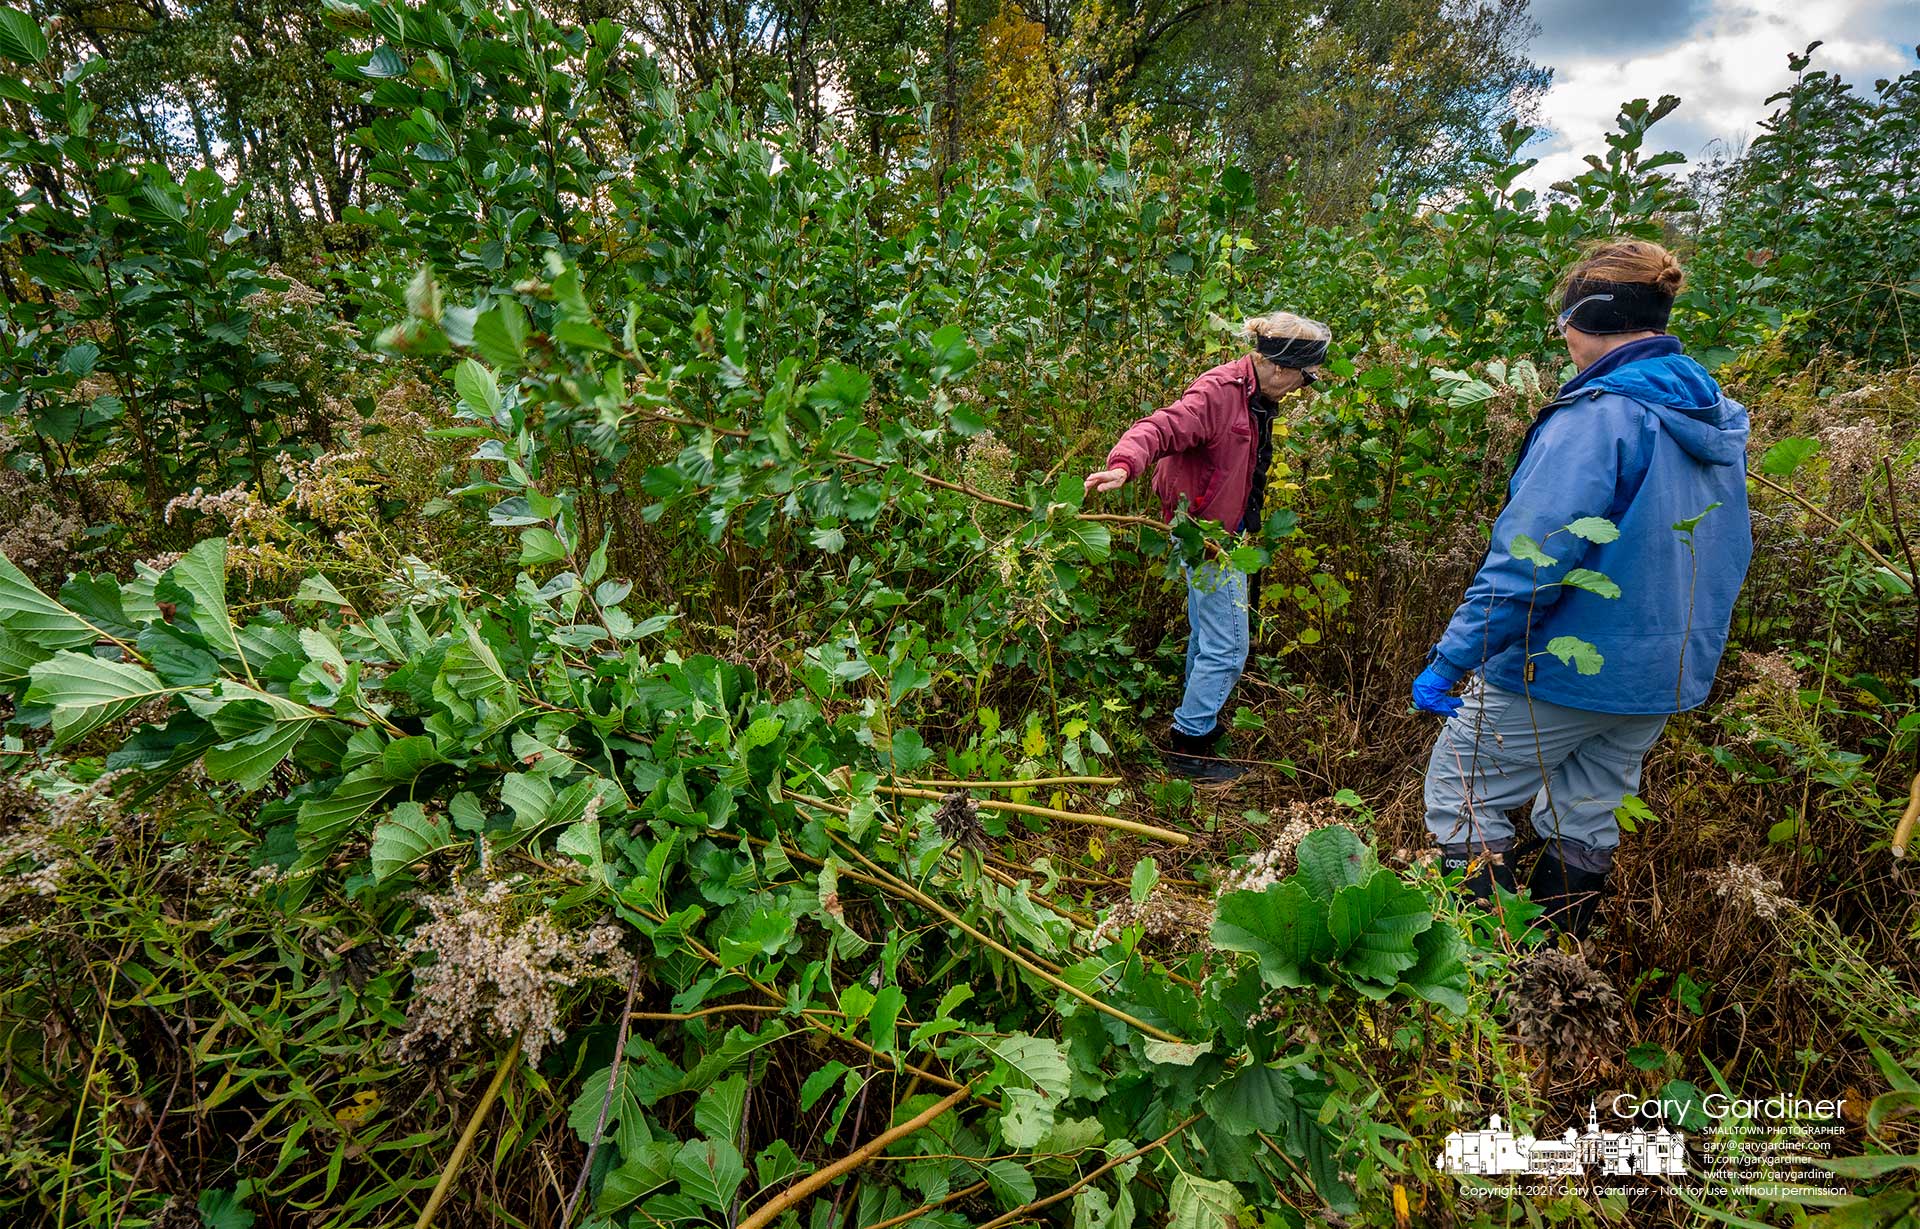 Sharon Woods rangers and volunteers remove the heavy growth of European Alder from a section of the prairie near Schrock Lake to prevent the invasive tree from taking over and killing sections of the prairie with its native grasses and wildflowers. My Final Photo for Oct. 26, 2021.